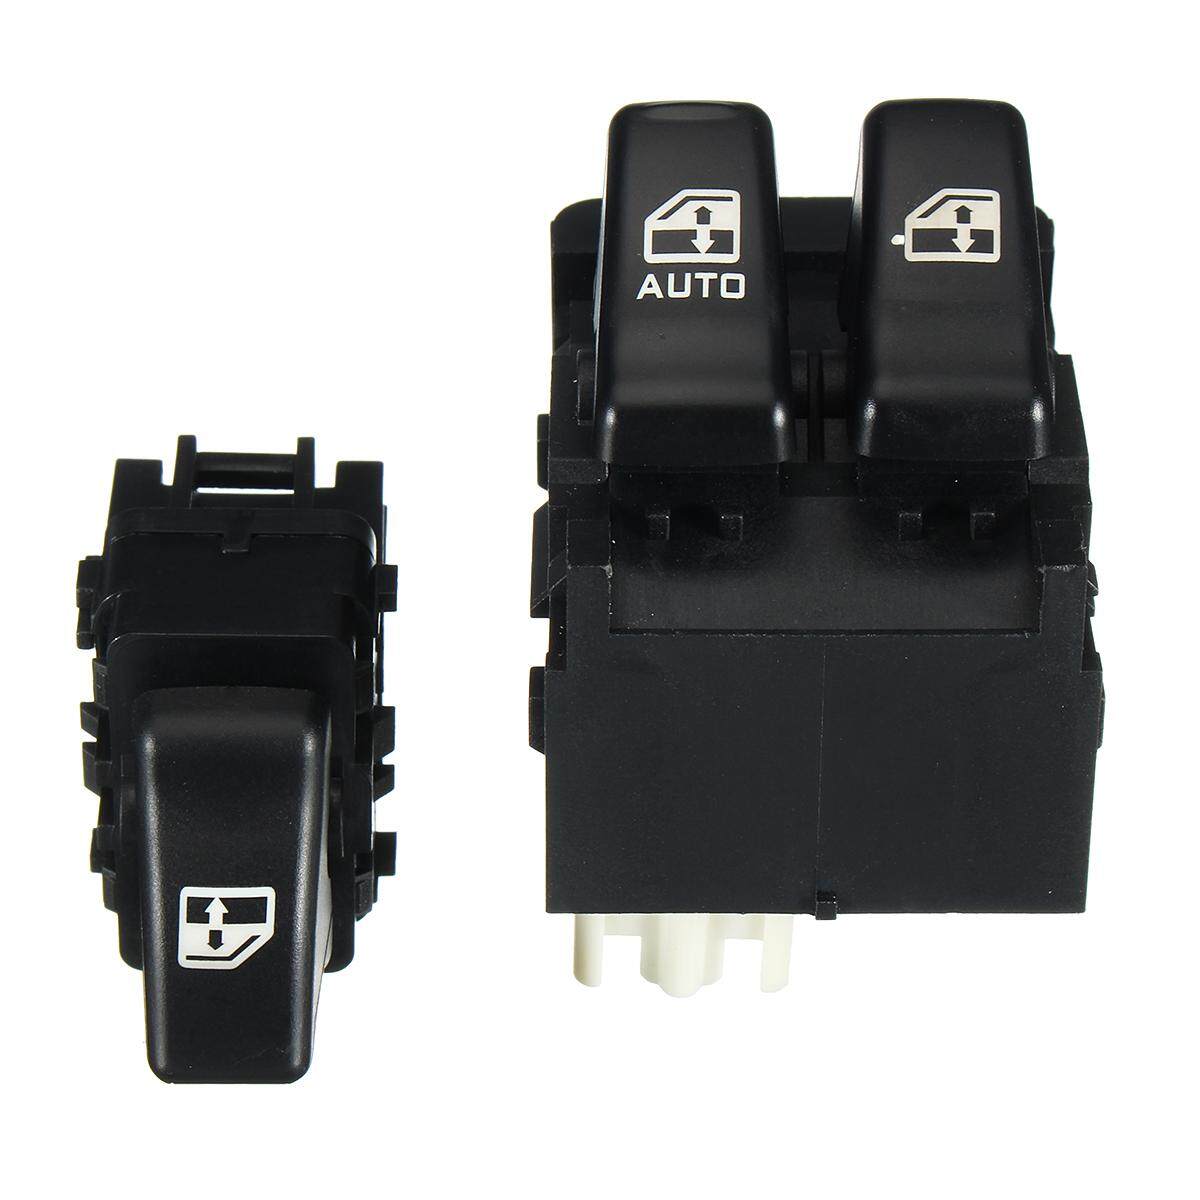 2Pcs Window Master Switch Button for Chevy Venture Olds Silhouette Front 